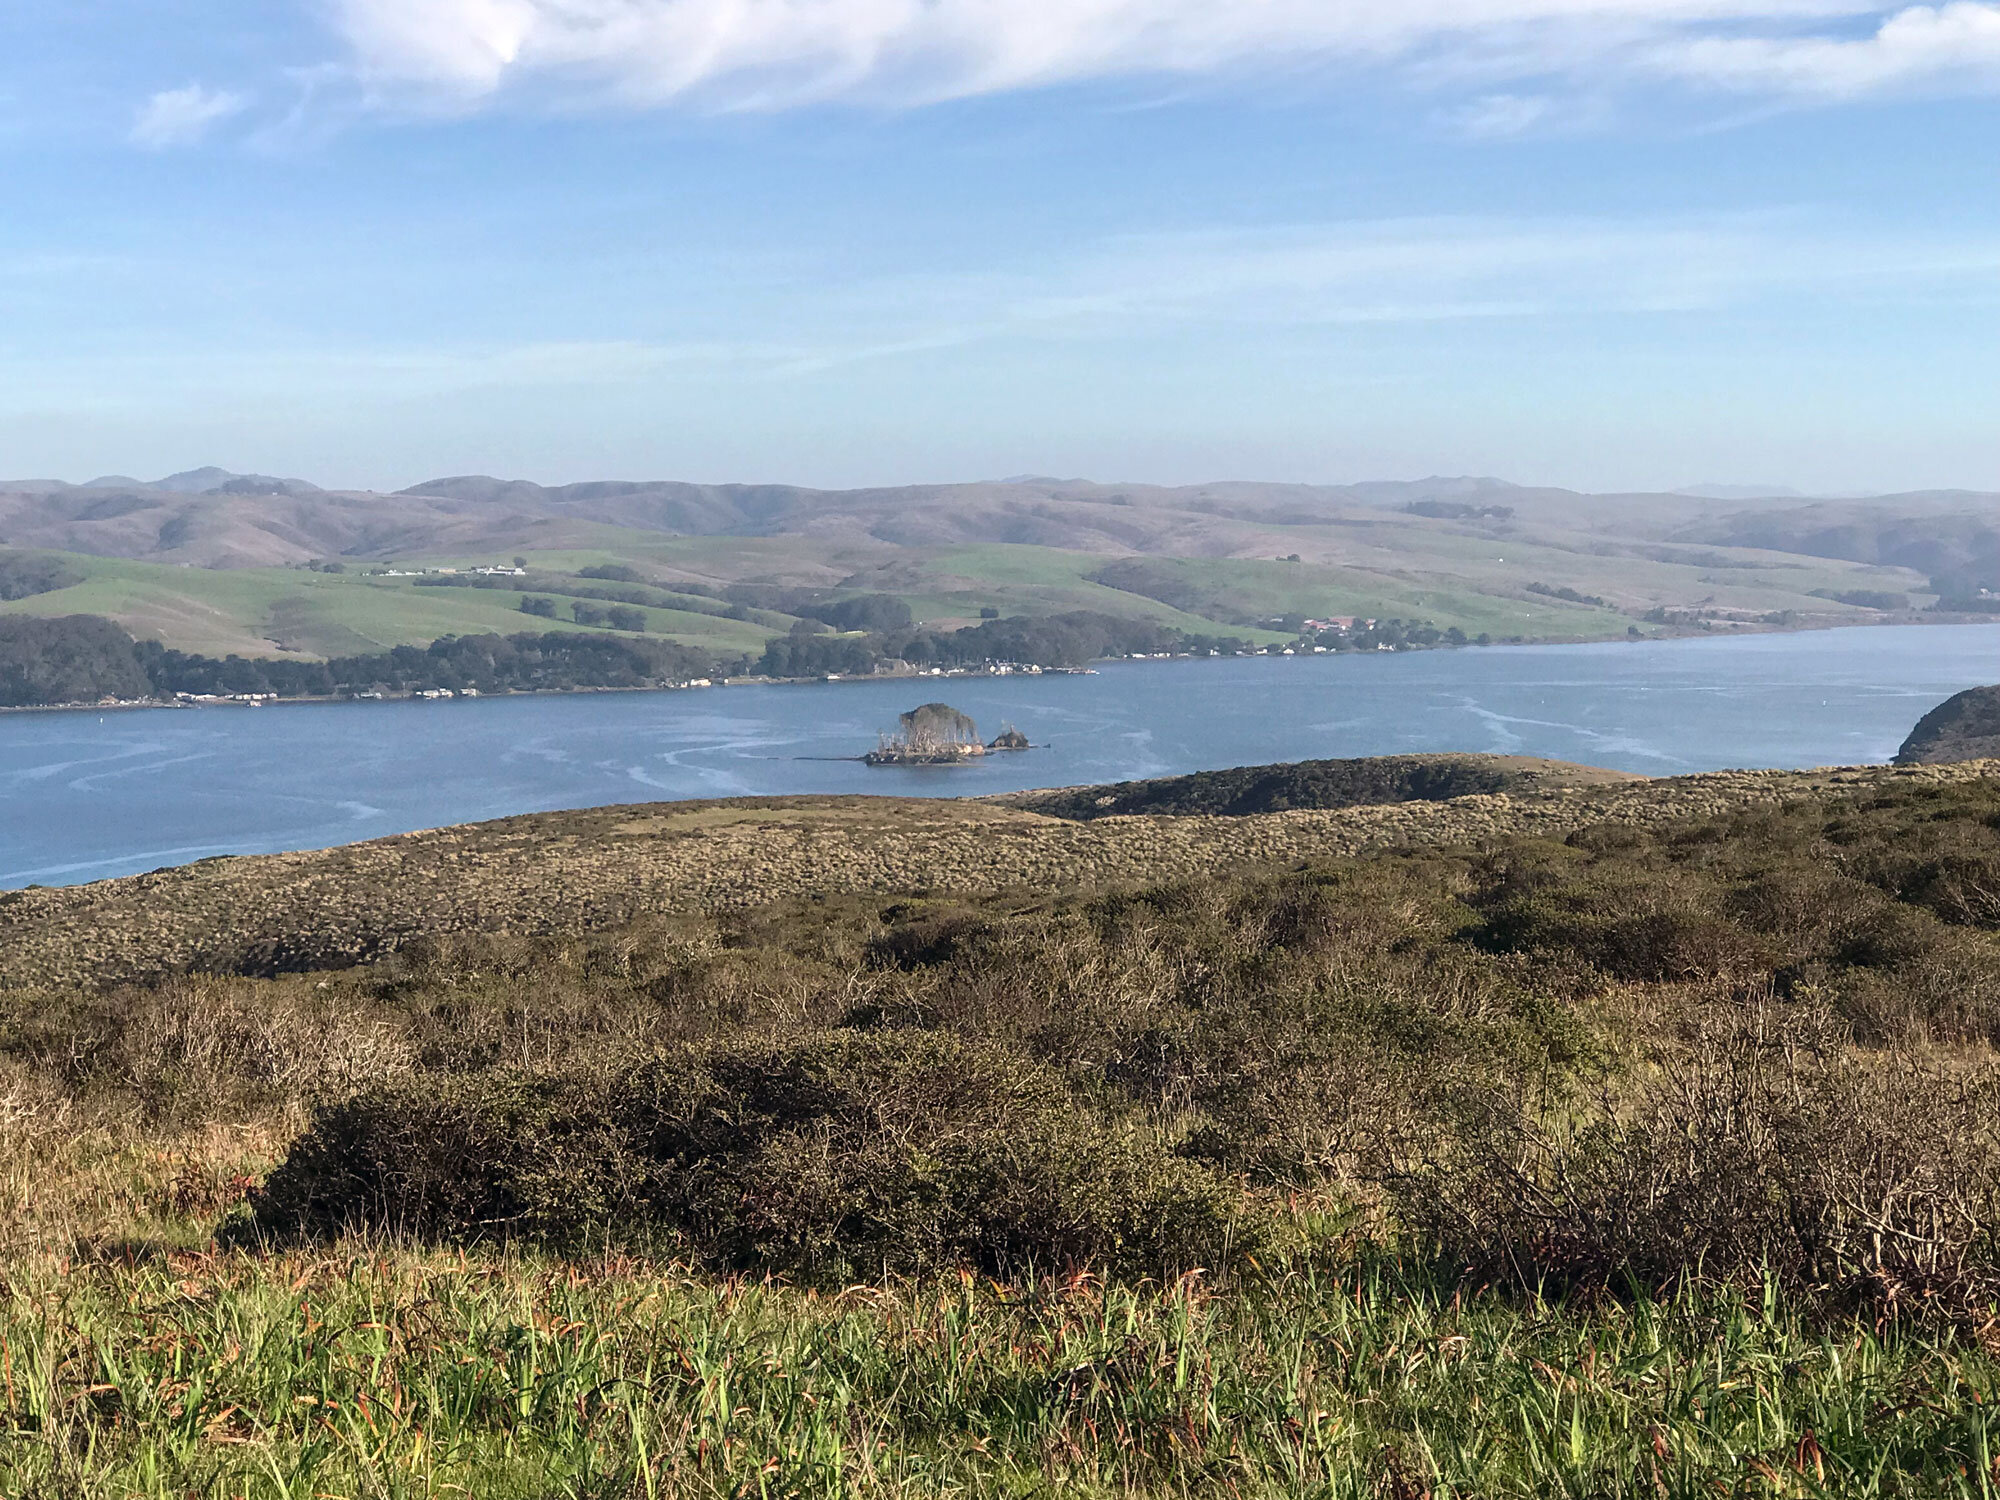 view of Tomales Bay with Hog Island